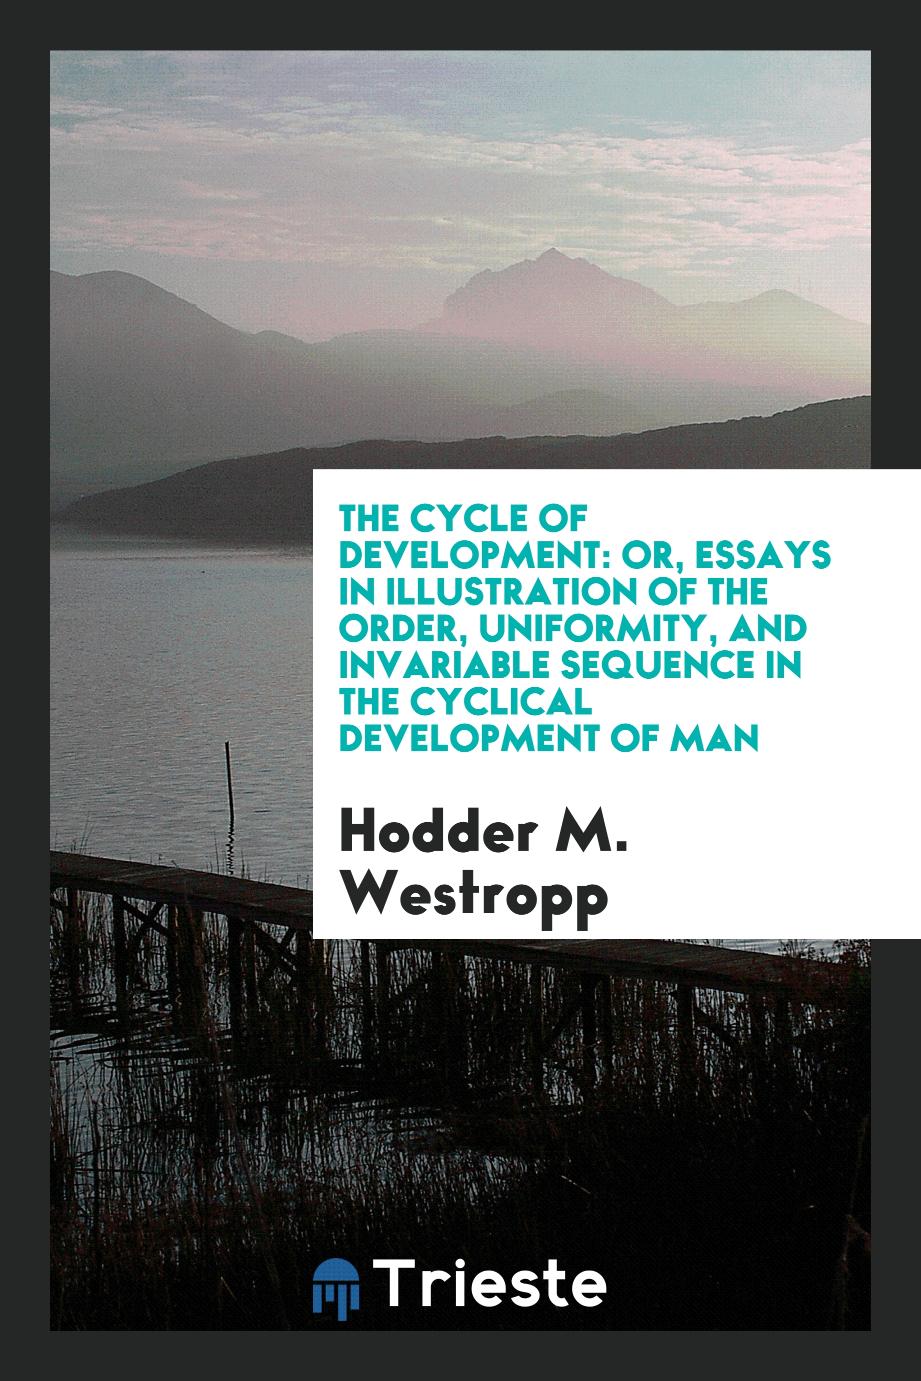 The Cycle of Development: or, Essays in Illustration of the Order, Uniformity, and Invariable Sequence in the Cyclical Development of Man